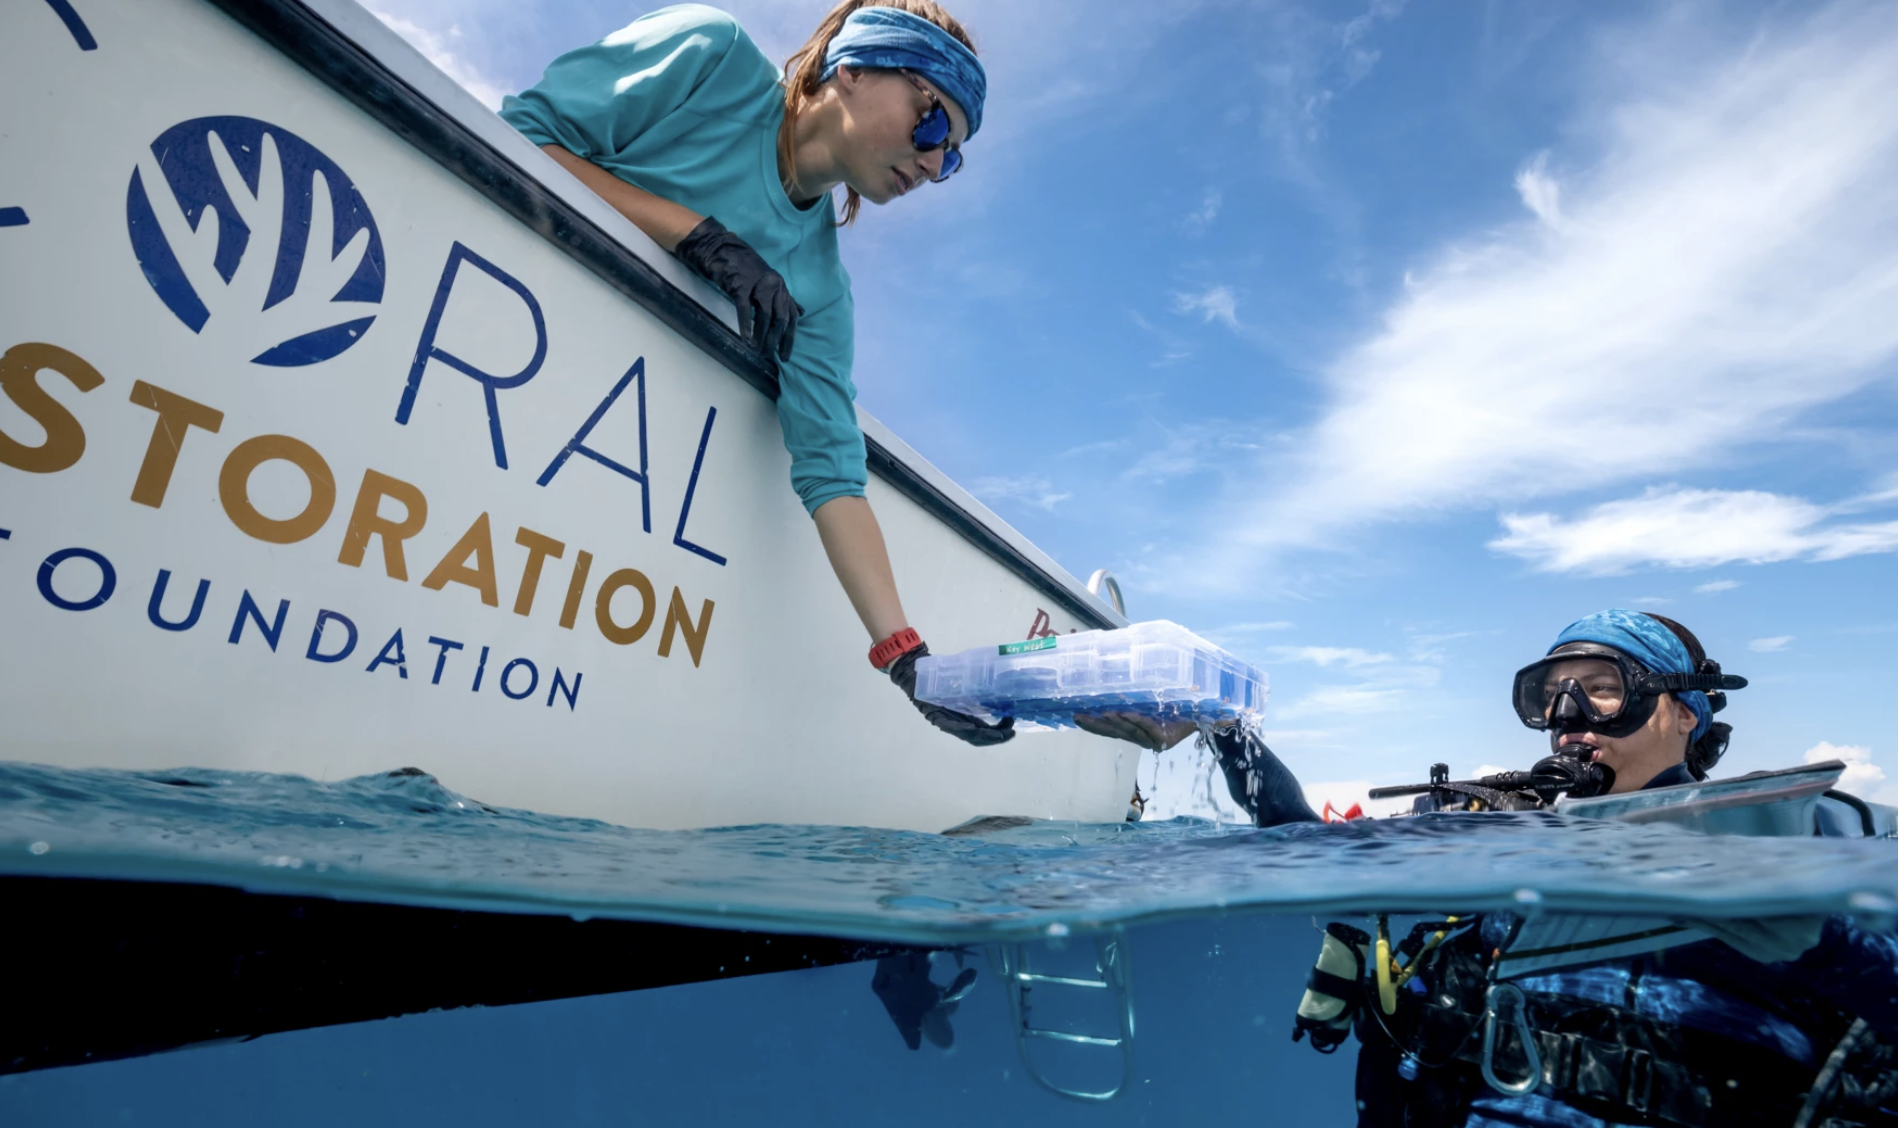 Coral Restoration Foundation Launches a New Tool for the Coral Restoration.